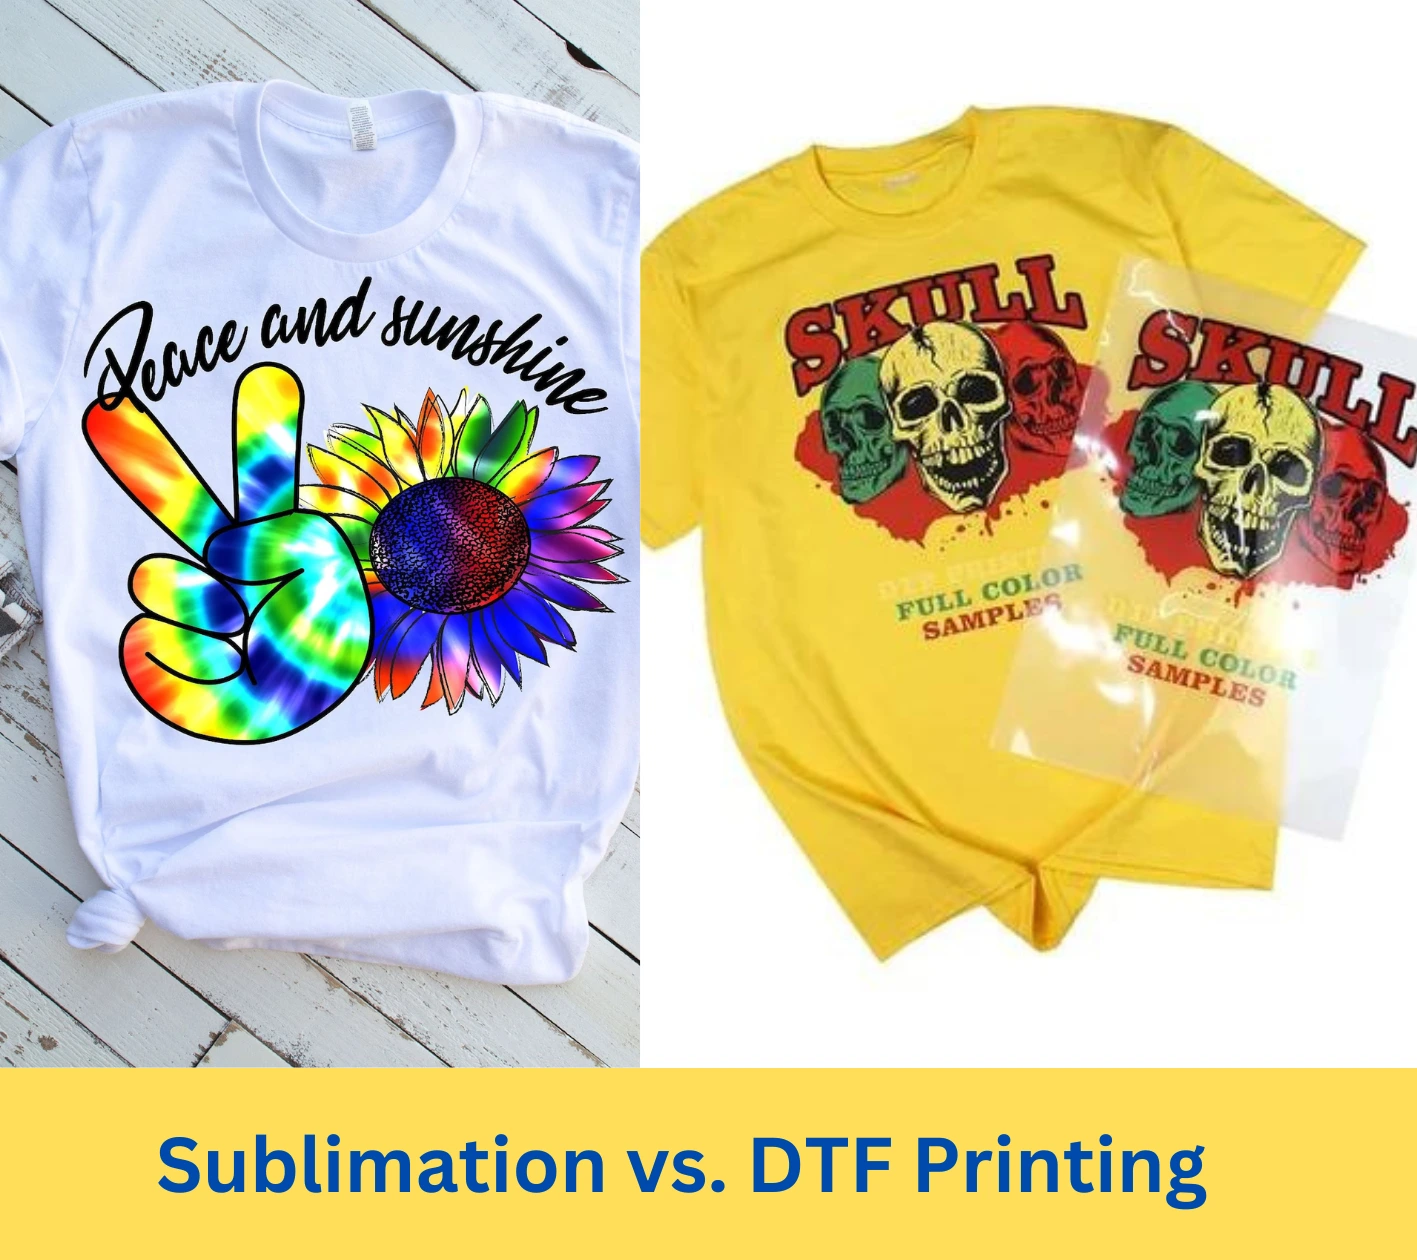 Dtf Vs Sublimation Printing Which Is Better And Durable